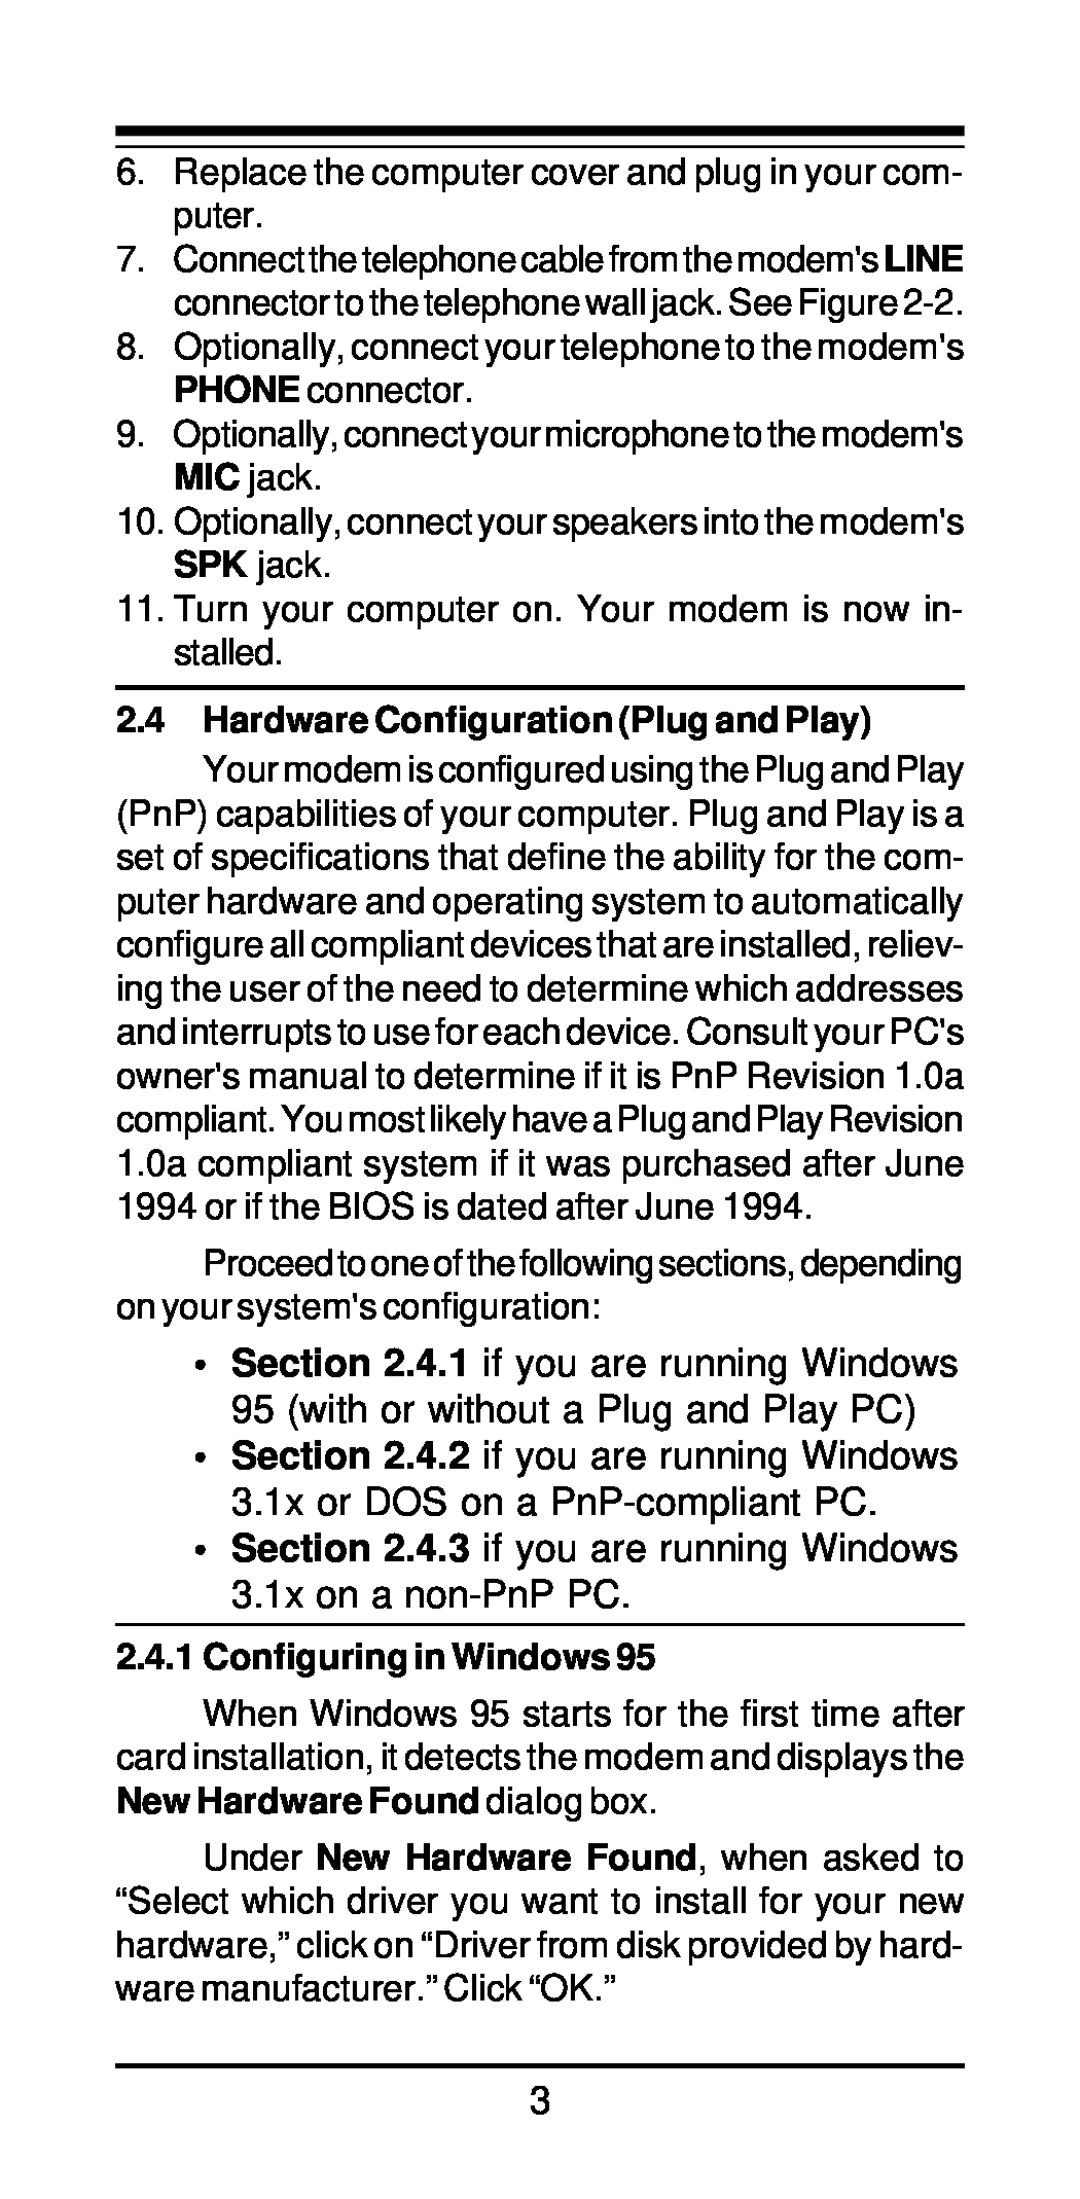 MaxTech xpvs336i user manual 4.3 if you are running Windows 3.1x on a non-PnP PC 